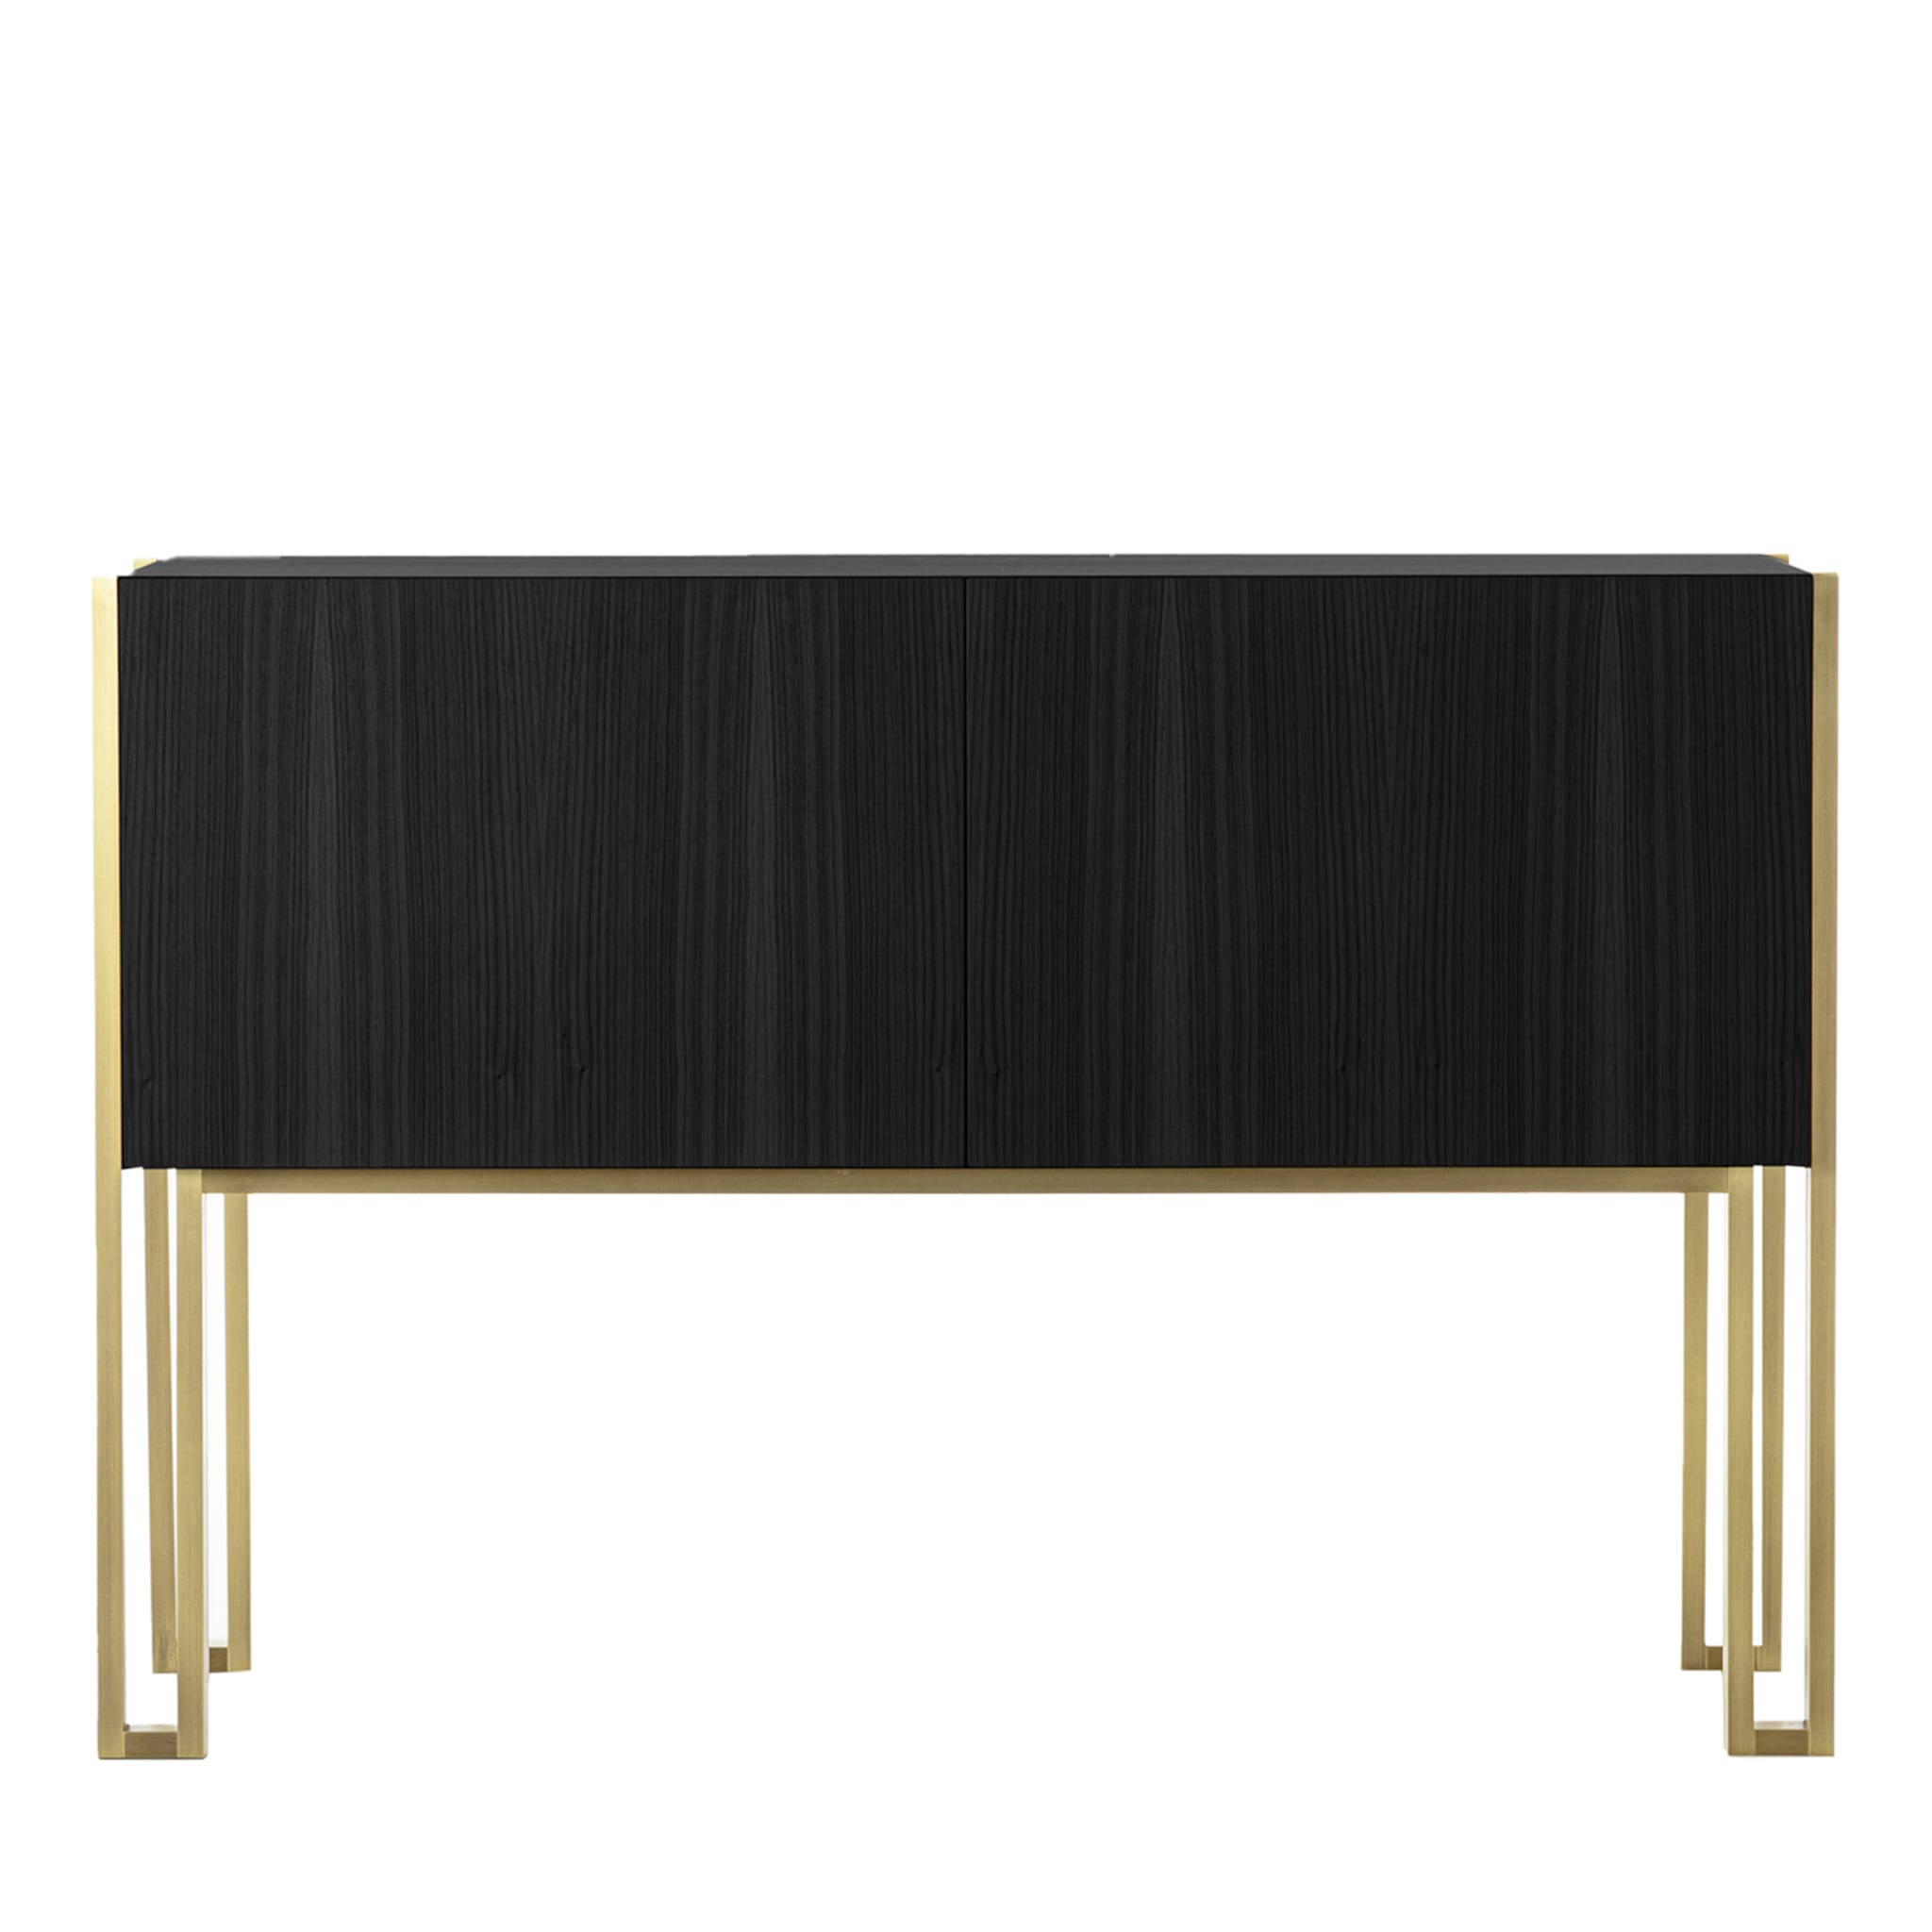 Mirage Vintage with Brass Legs in Opaque Black Sideboard - Main view